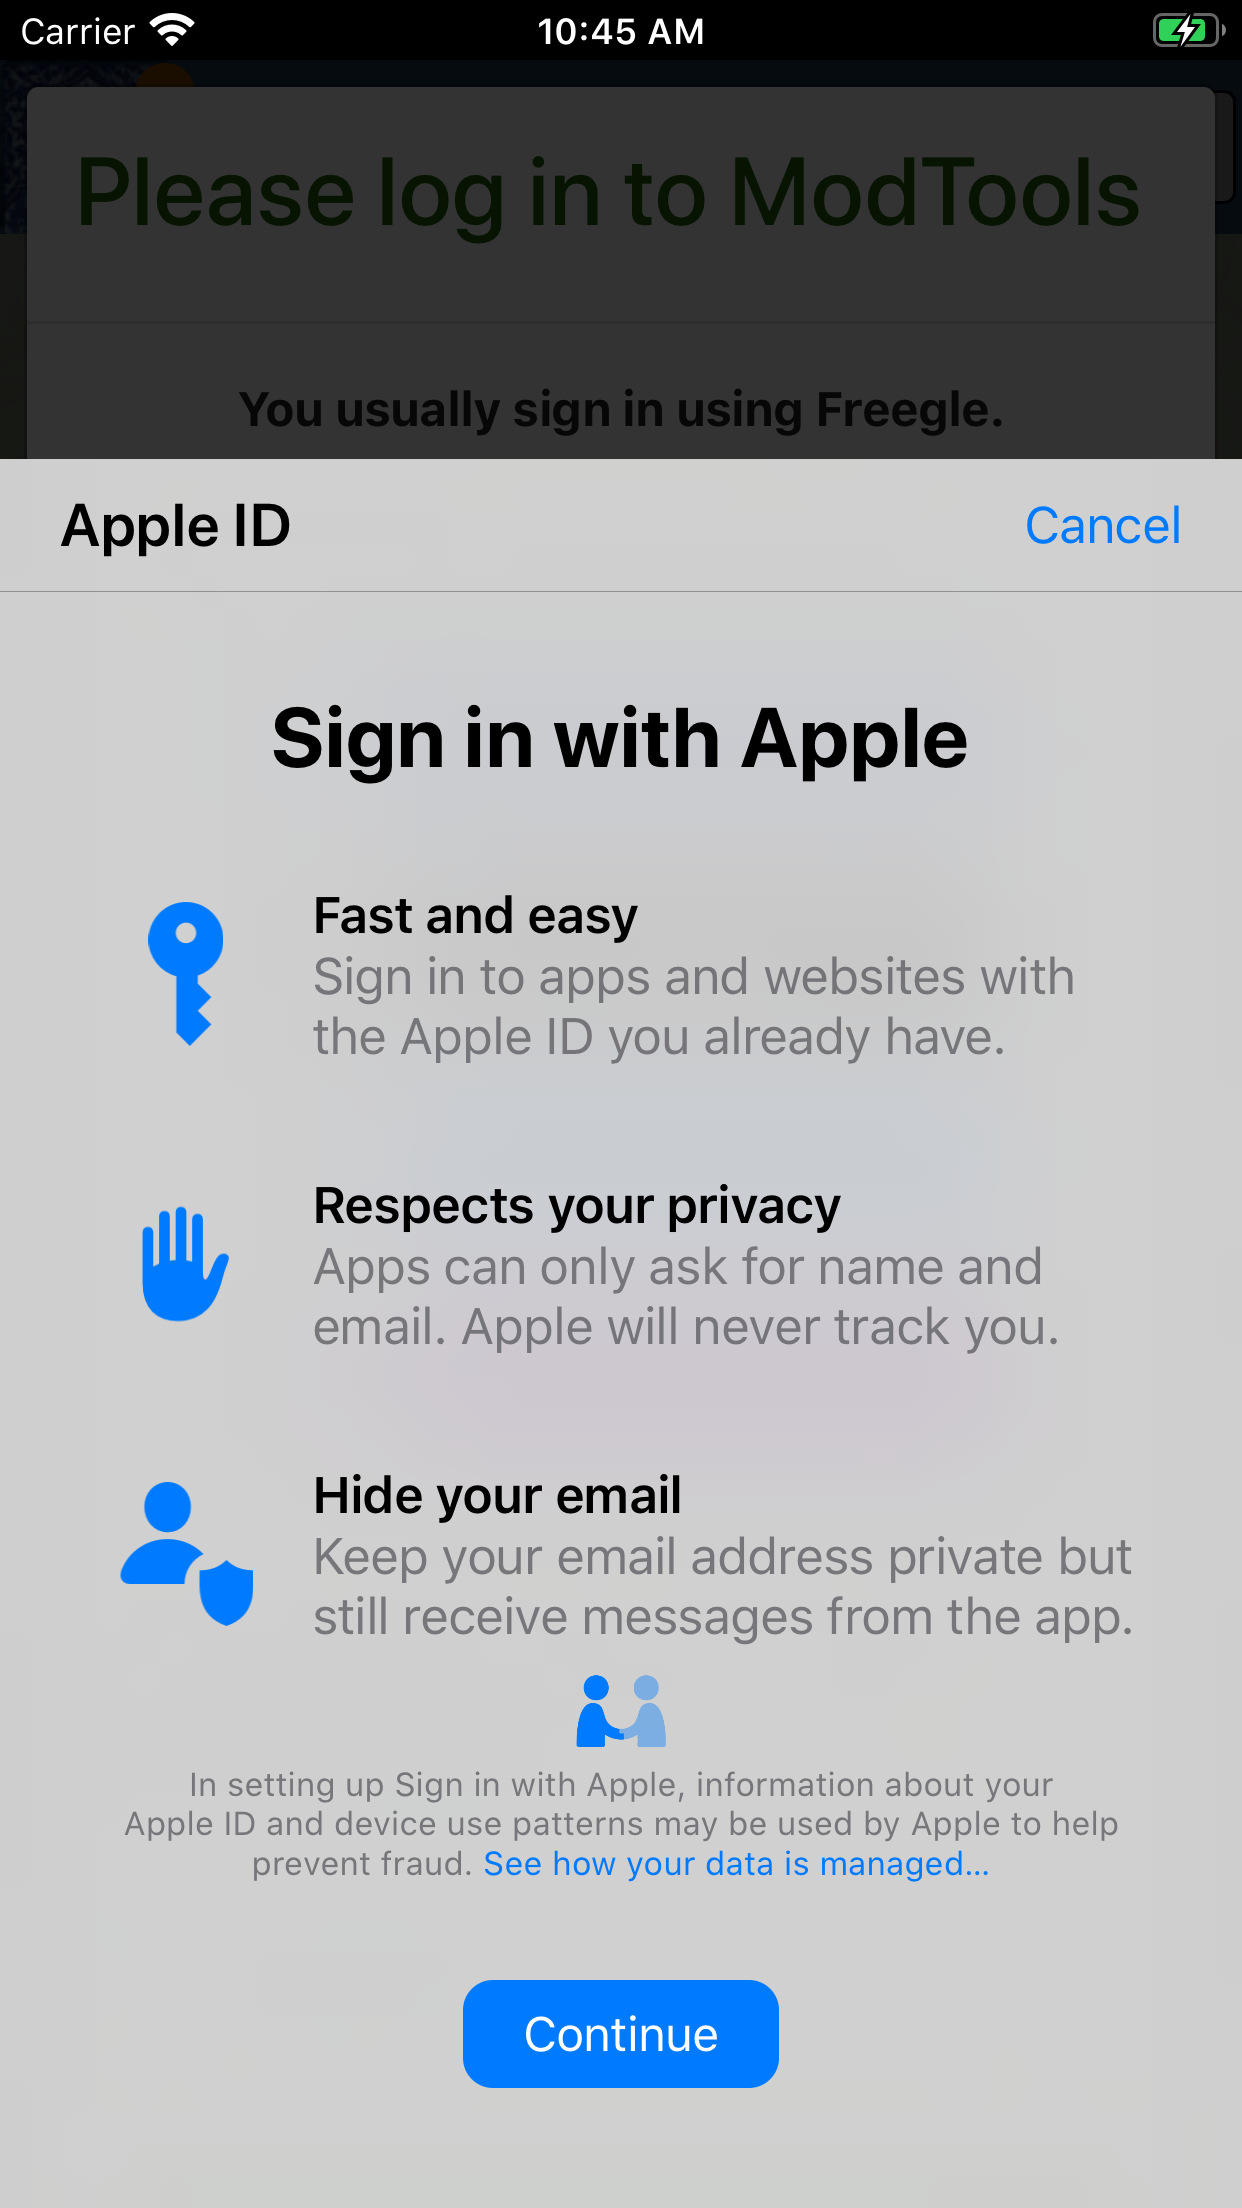 Info about Sign in with Apple